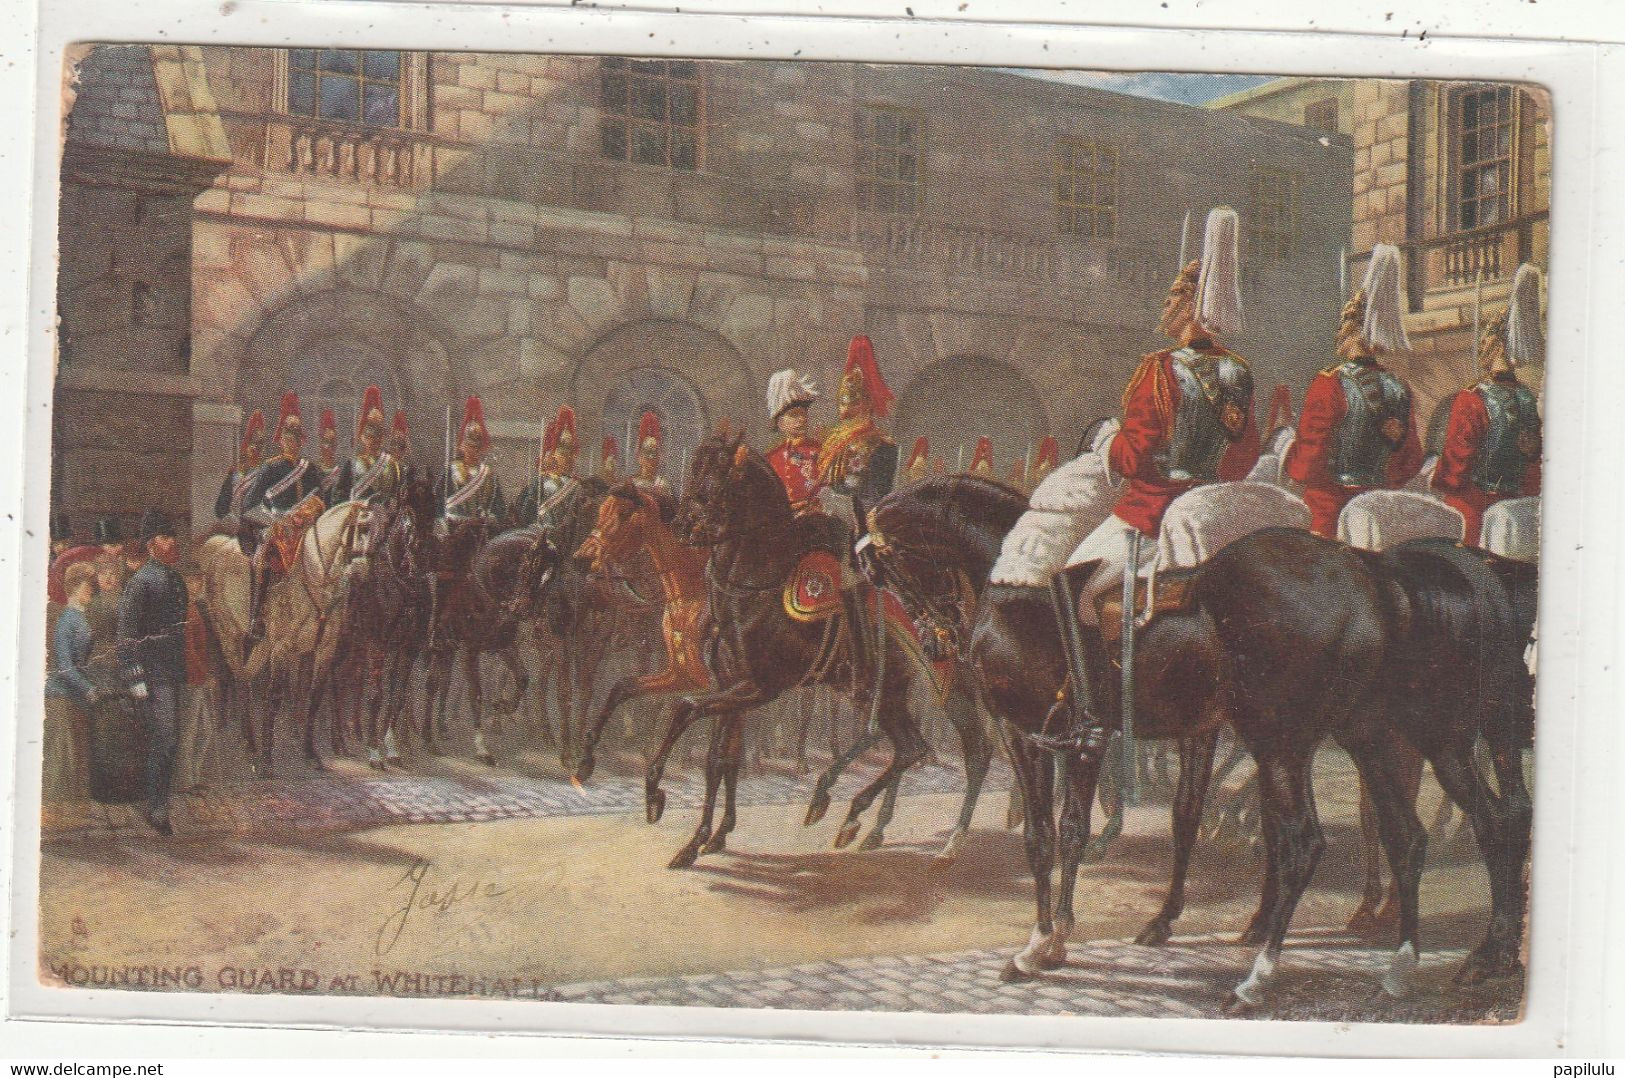 ANGLETERRE 16 : Mouting Guard At Whitehall ; édit. Raphael Tuck " Oilette N° 6412 - Whitehall